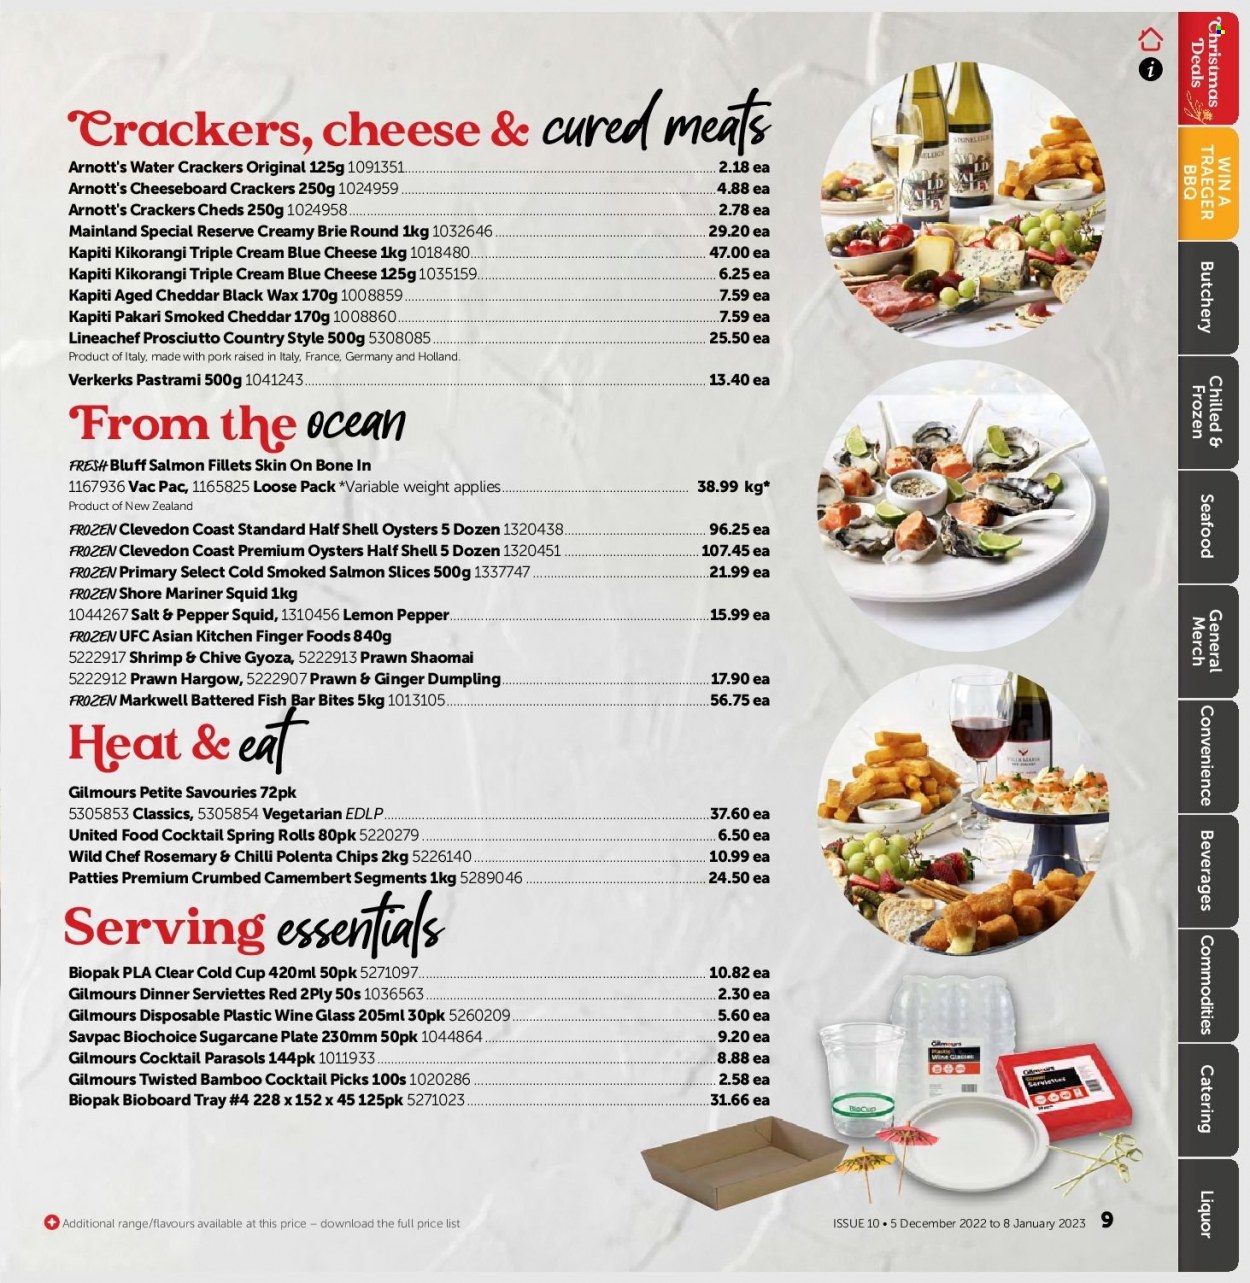 thumbnail - Gilmours mailer - 05.12.2022 - 08.01.2023 - Sales products - sugar cane, salmon, salmon fillet, shrimps, smoked salmon, squid, oysters, seafood, prawns, fish, Shore Mariner, dumplings, spring rolls, prosciutto, pastrami, blue cheese, camembert, brie, crackers, polenta, rosemary, liquor, beef meat. Page 8.